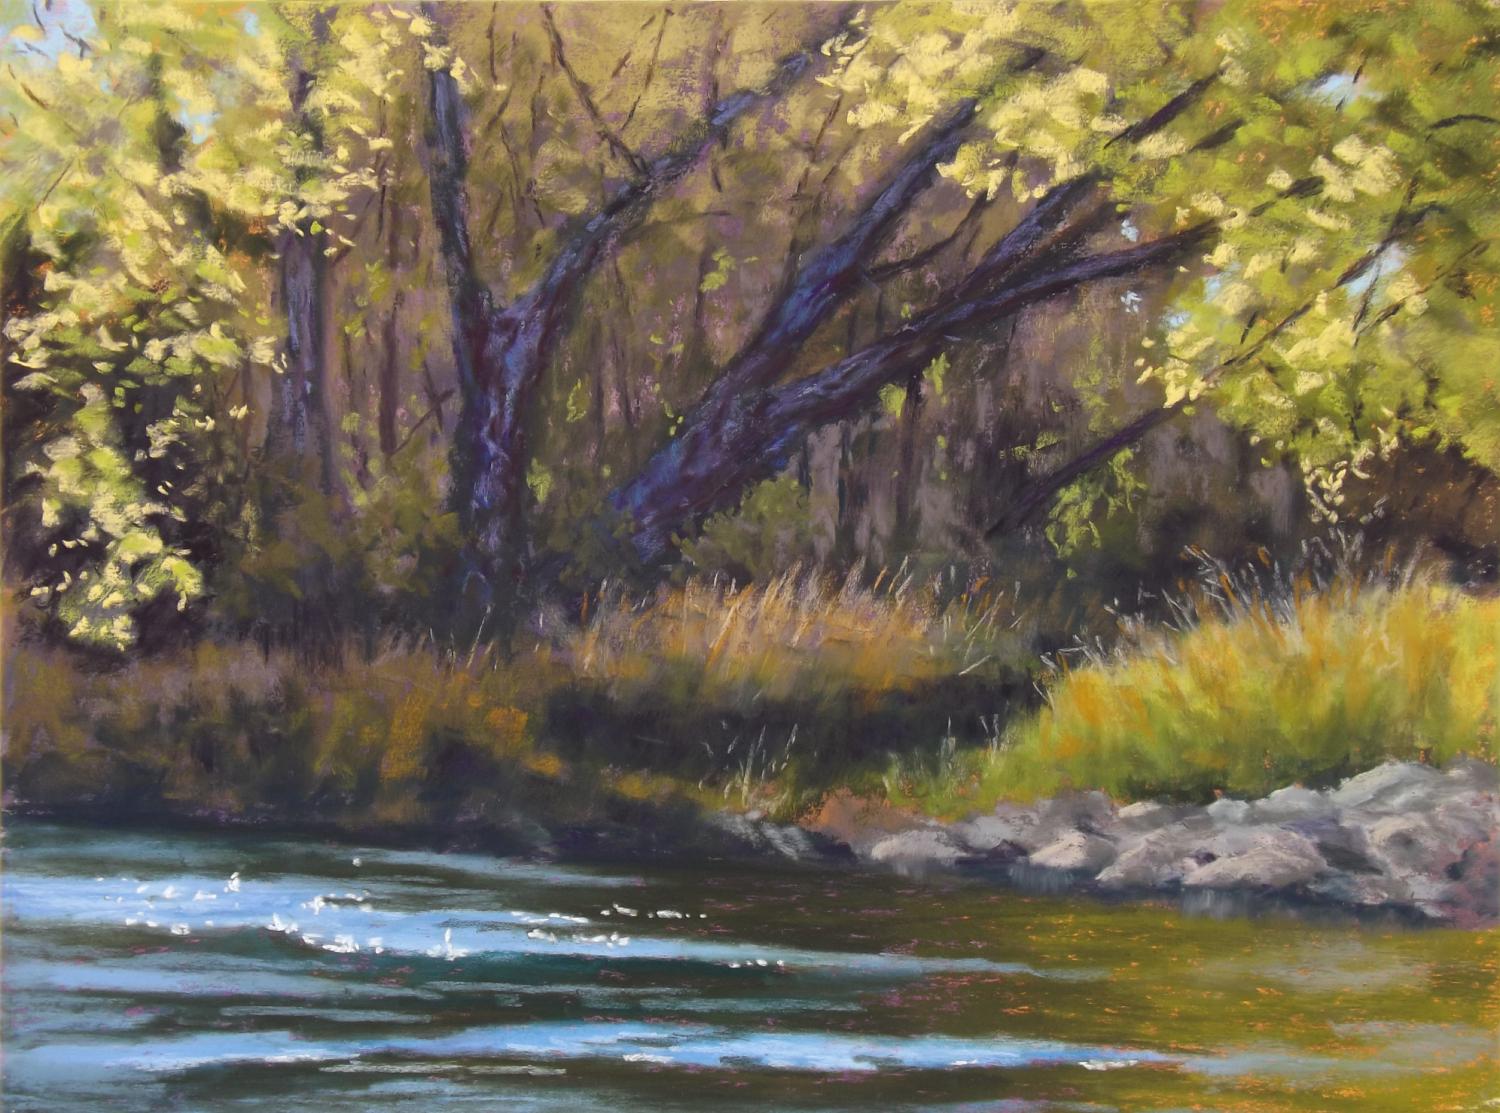 At the Edge of the Stream, Original Painting - Art by Patricia Prendergast